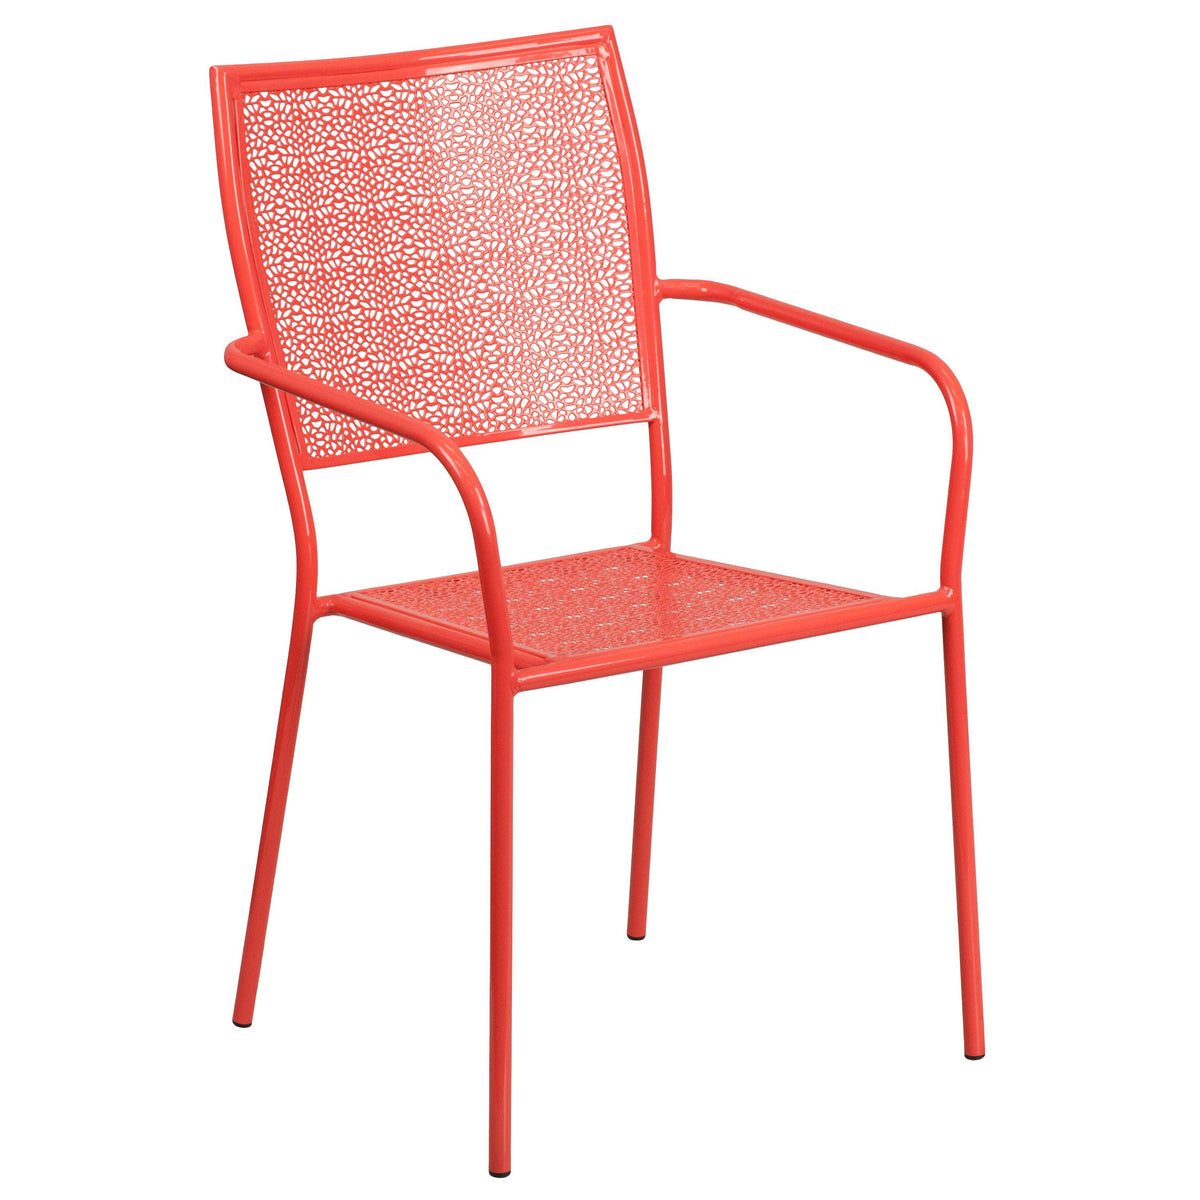 Coral |#| 28inch Square Coral Indoor-Outdoor Steel Folding Patio Table Set with 2 Chairs